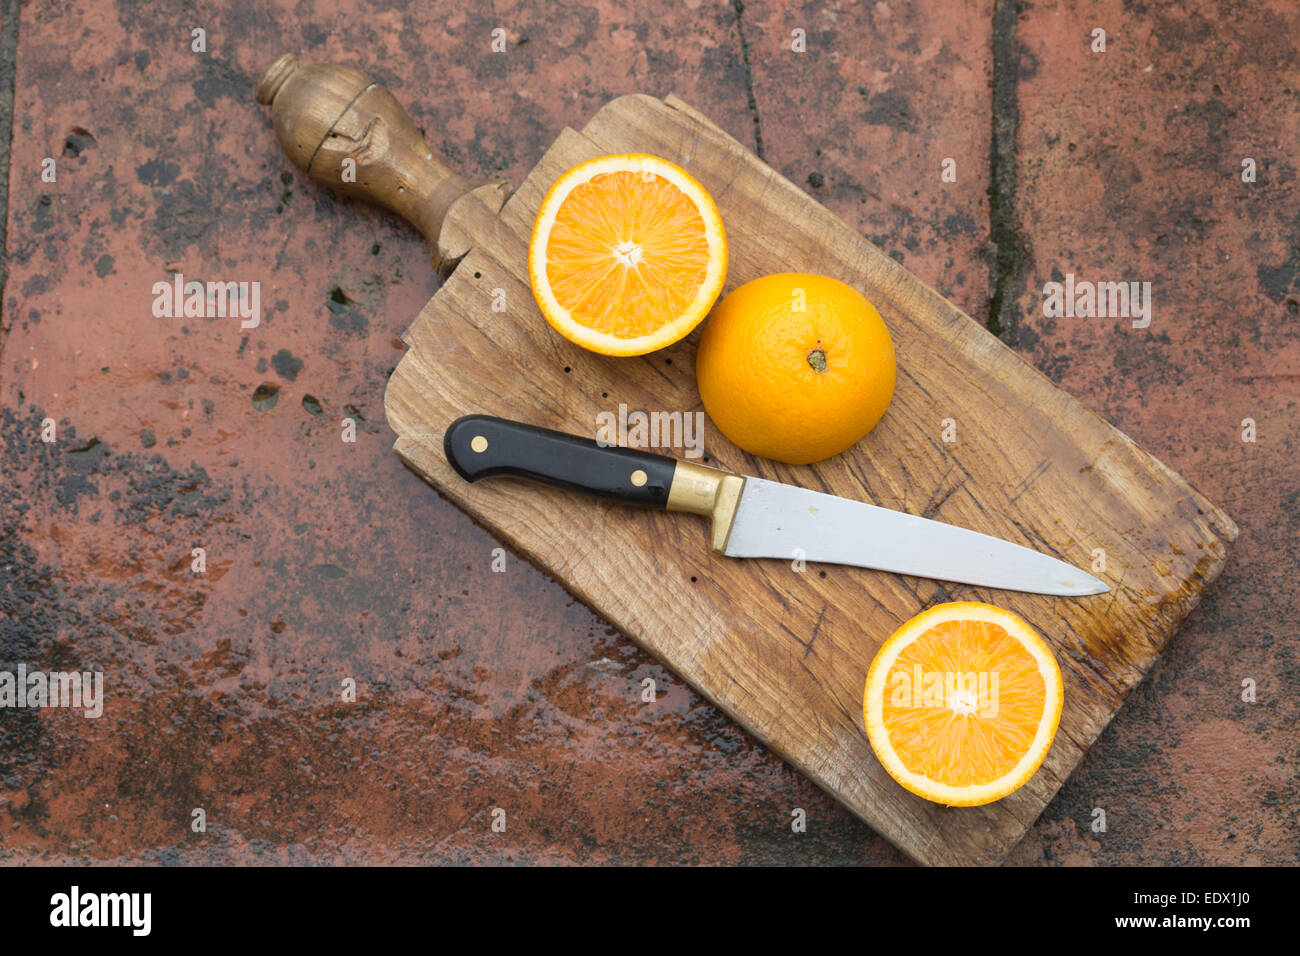 sliced oranges on an old wooden board with cutting knife, against terracotta tile wet surface background Stock Photo